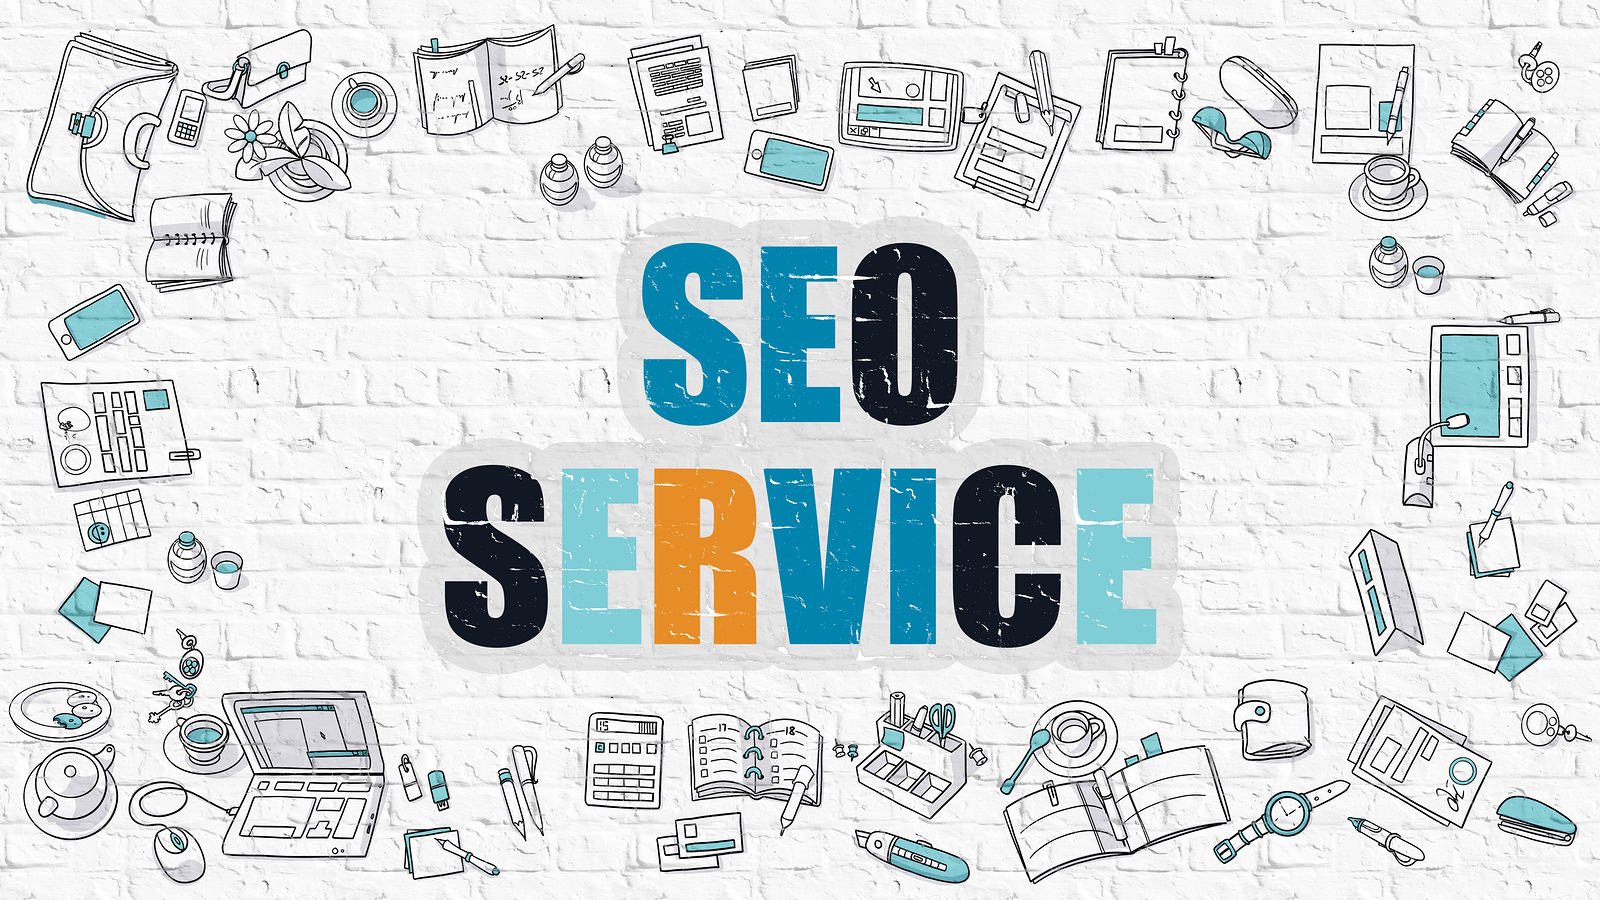 Methods of Operation used in Best Local SEO services